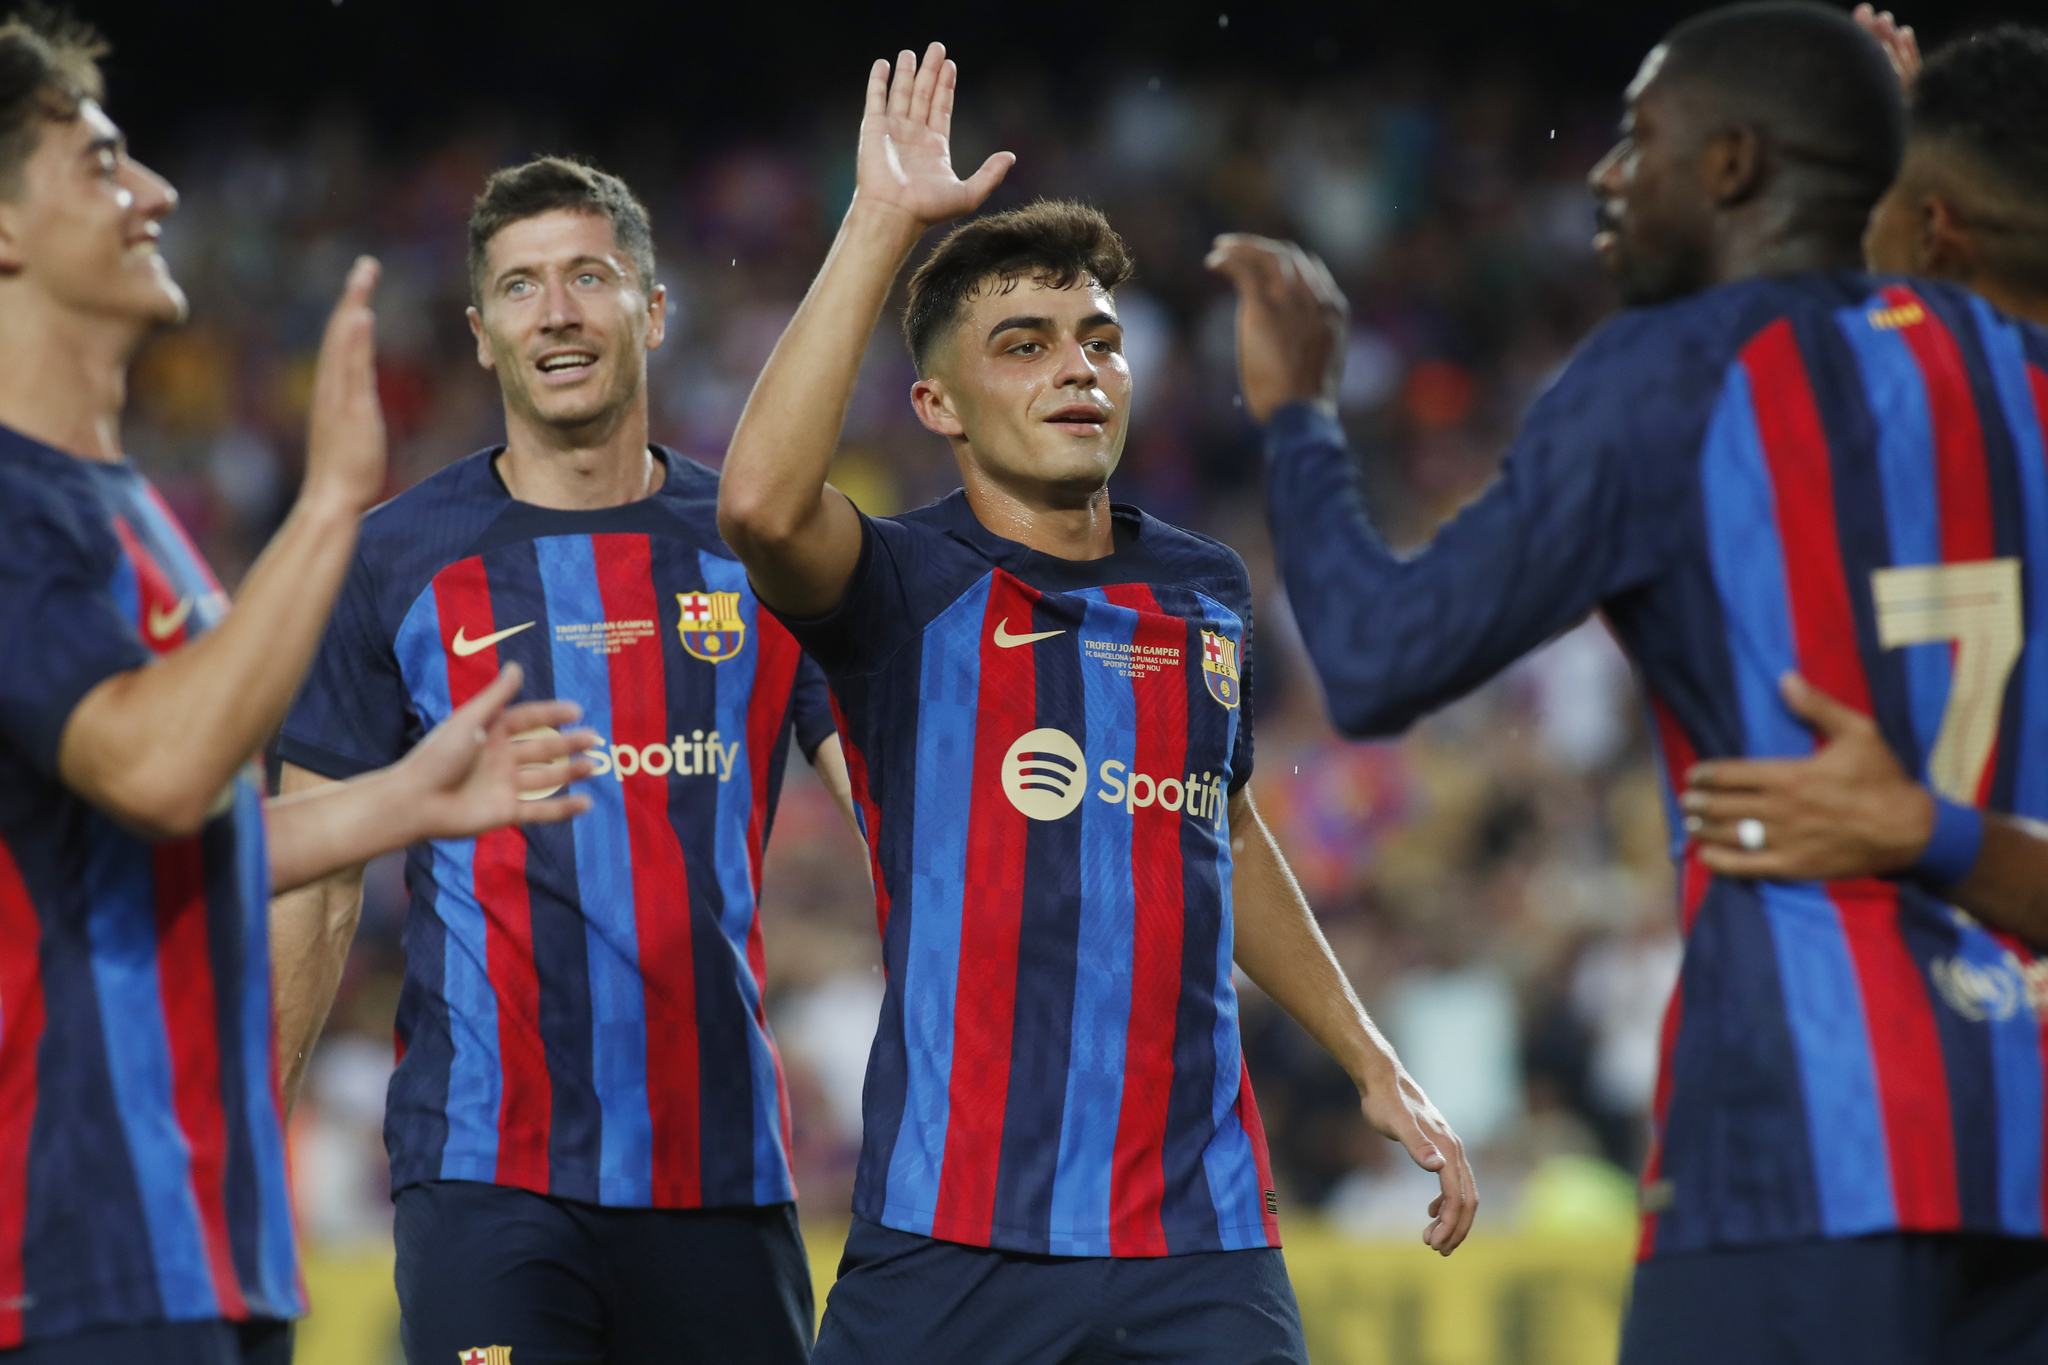 Barcelona vs Rayo Vallecano: Predicted line-ups, kick-off time, how and where to watch the game on TV and online